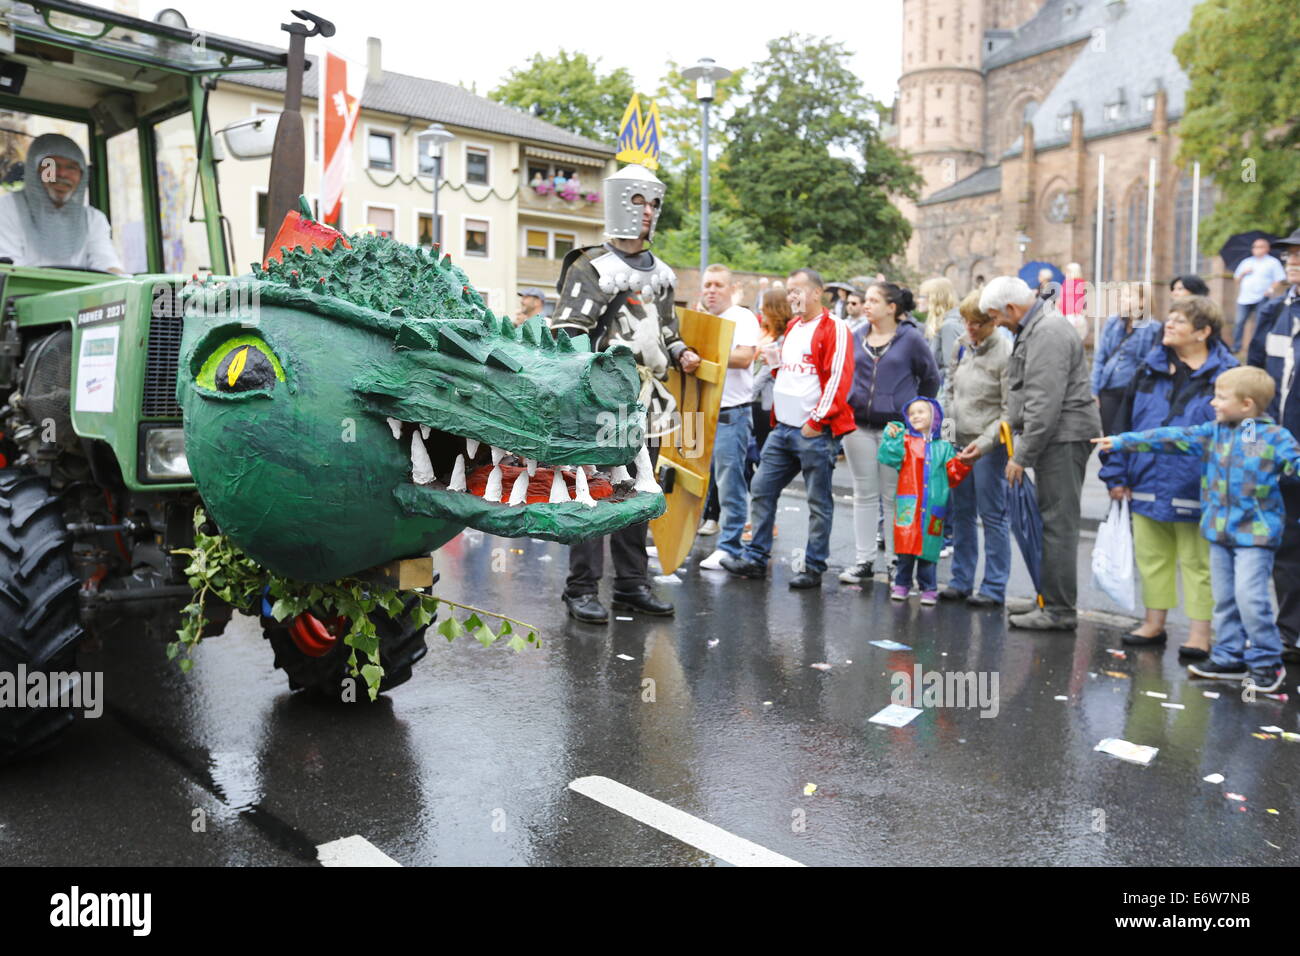 Worms, Germany. 31st Aug, 2014. A float with a dragon head is pictured at the Backfischfest parade 2014. The cathedral of Worms can be seen in the background. The first highlight of this year's Backfischfest was the big parade through the city of Worms with 125 groups and floats. Community groups, sport clubs, music groups and business from Worms and further afield took part. © Michael Debets/Pacific Press/Alamy Live News Stock Photo